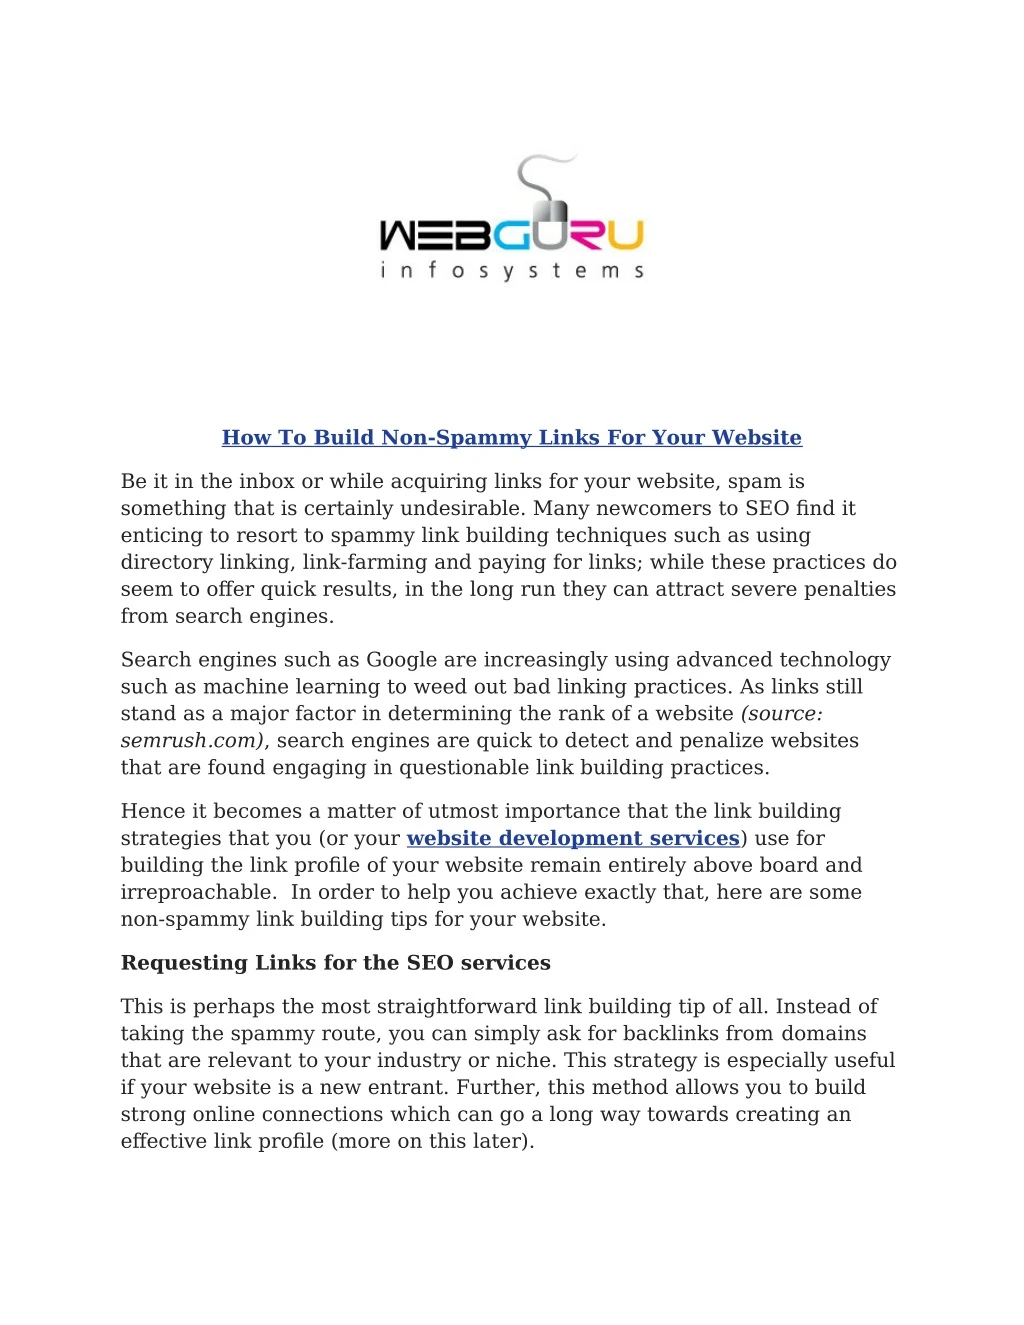 how to build non spammy links for your website